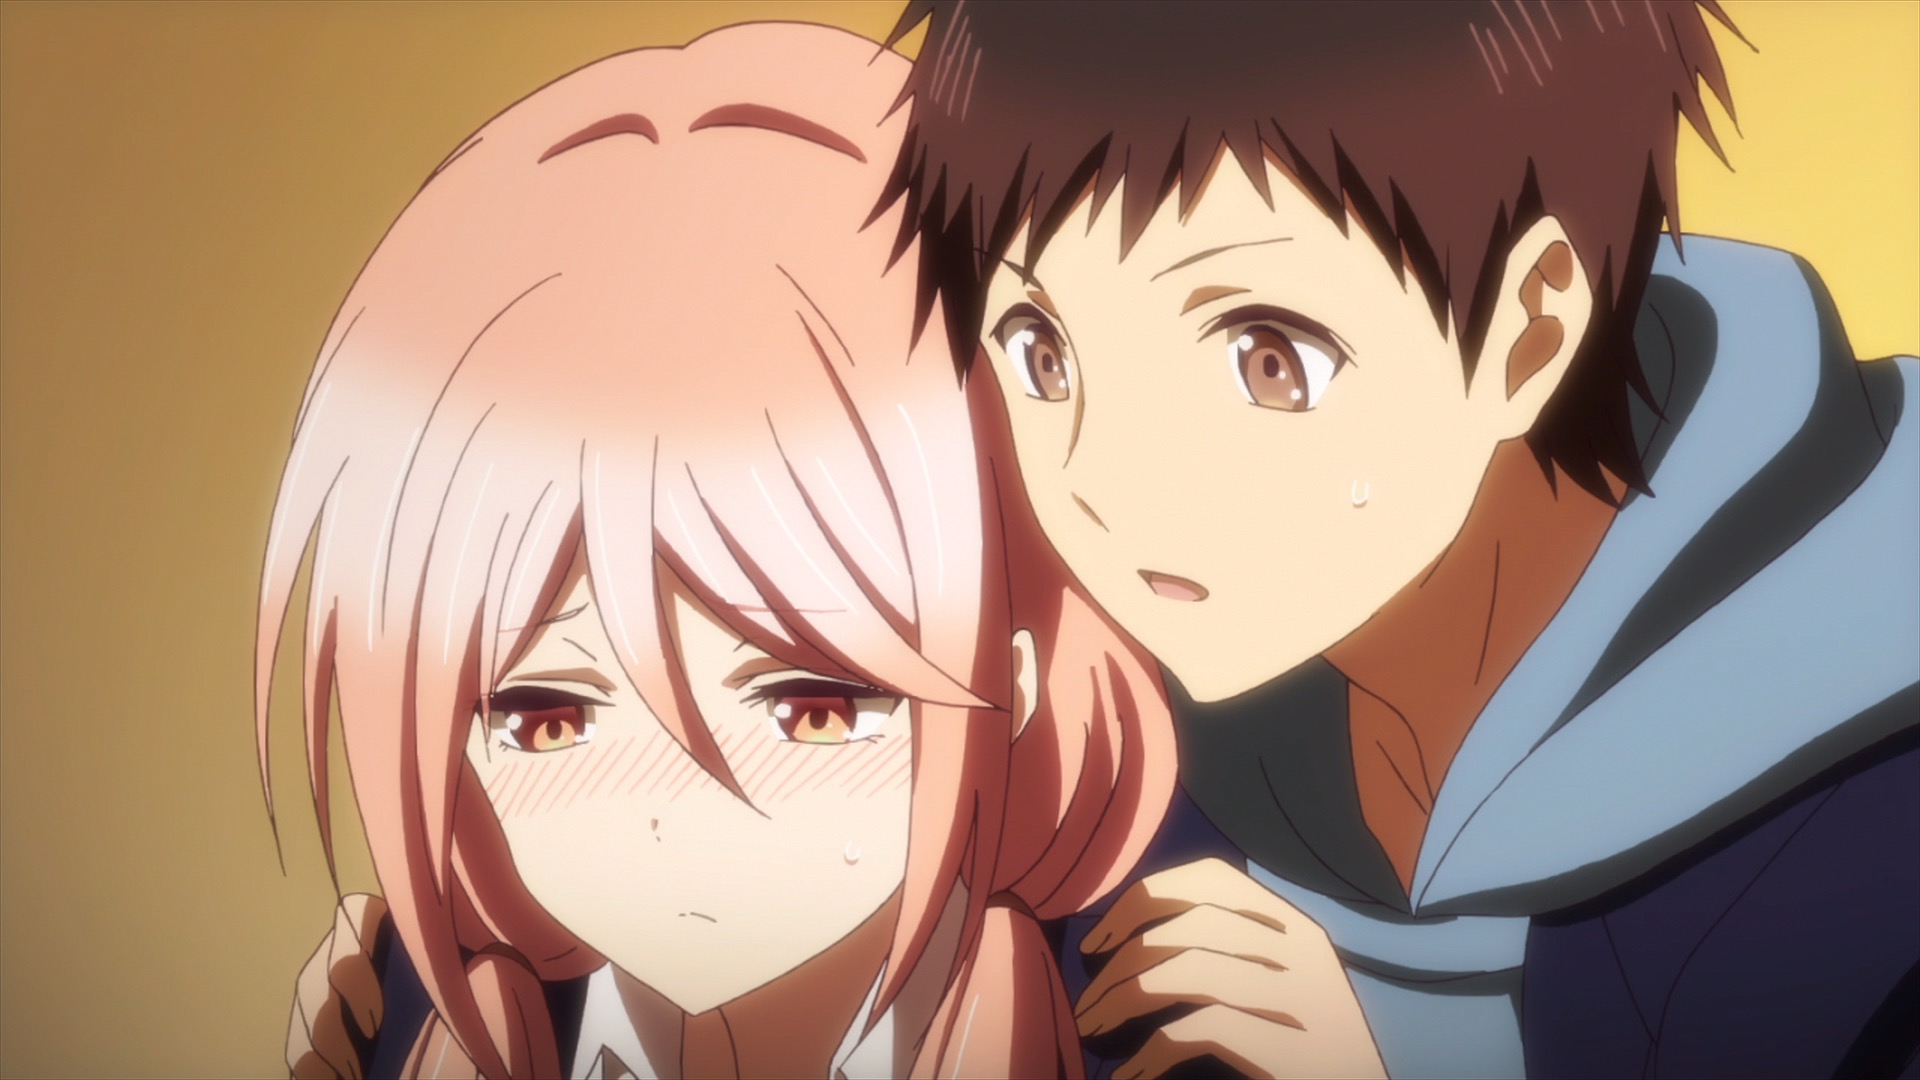 NTR: Netsuzou Trap: Where to Watch and Stream Online